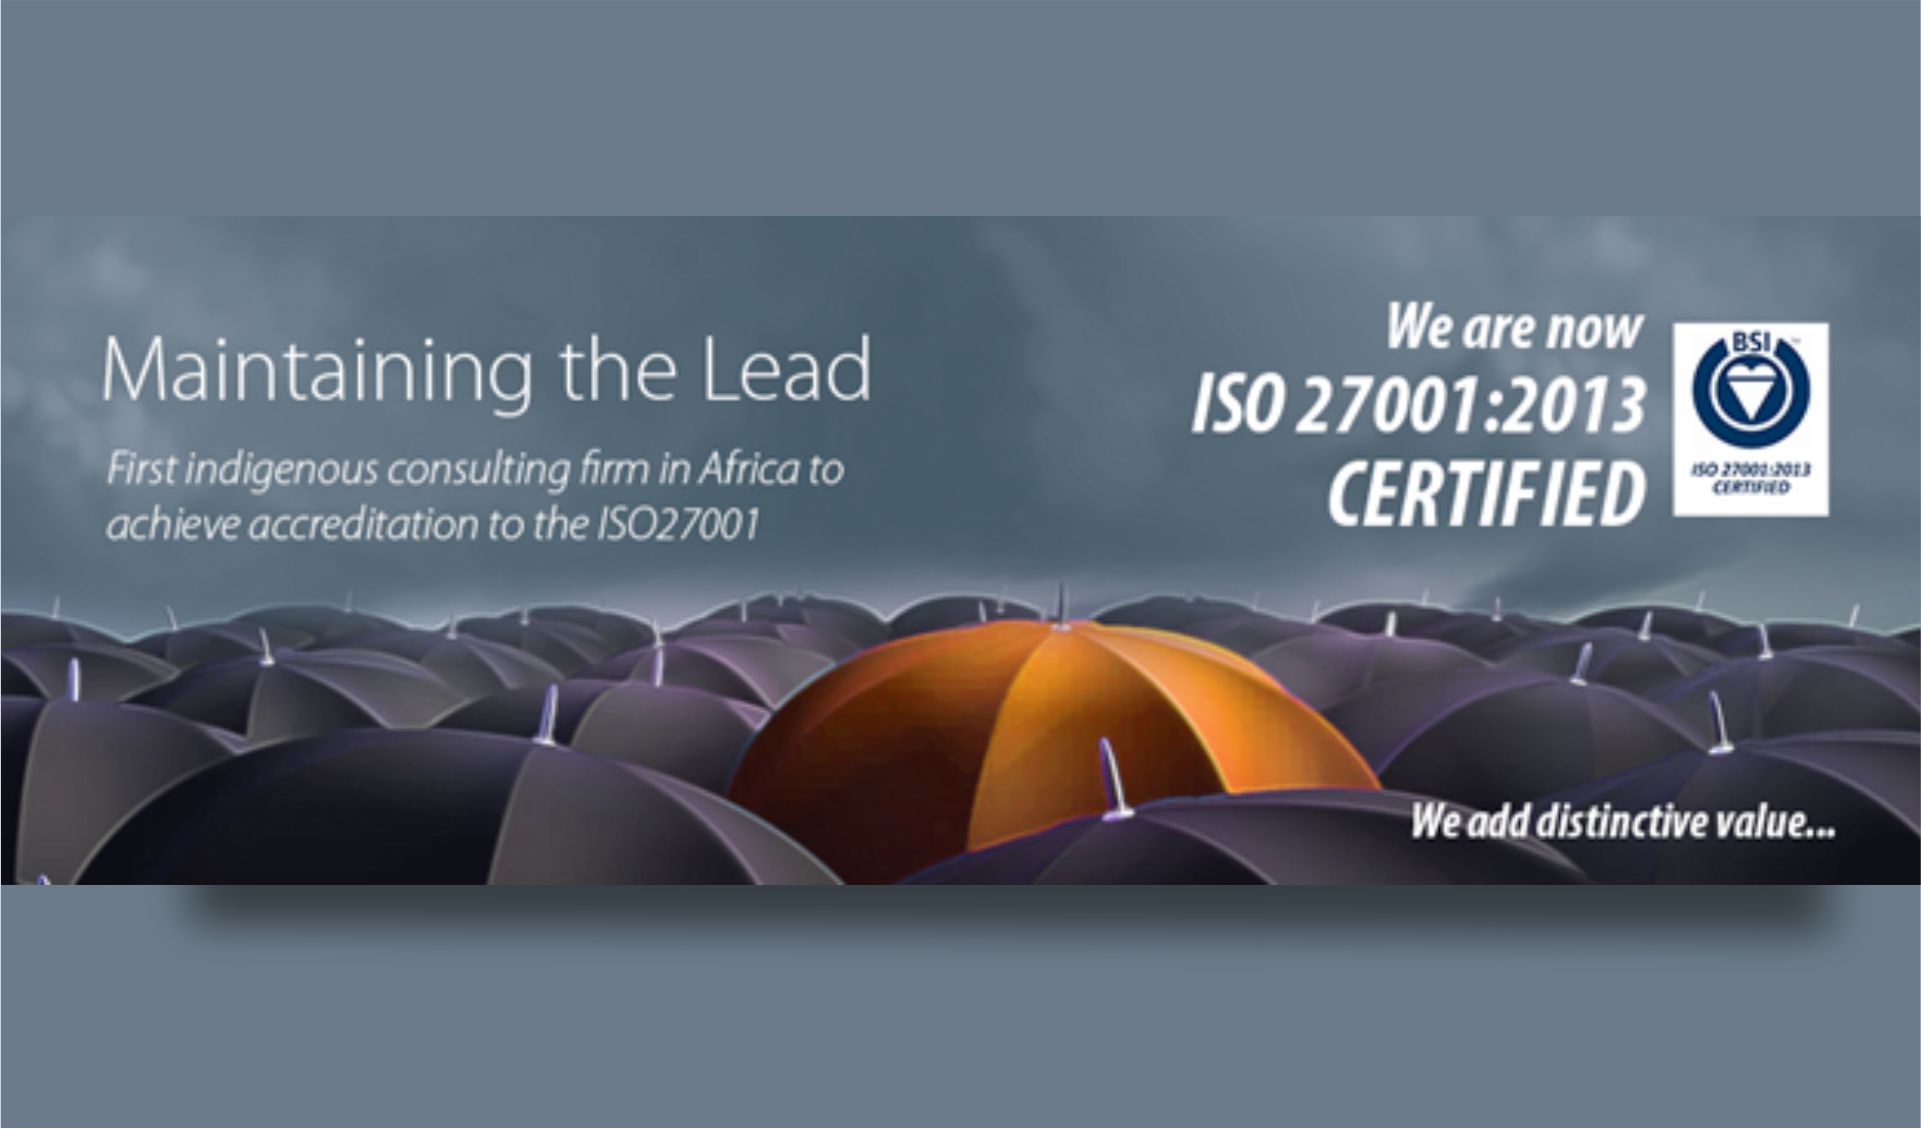 MAINTAINING THE LEAD : DIGITAL JEWELS IS ISO27001:2013 CERTIFIED